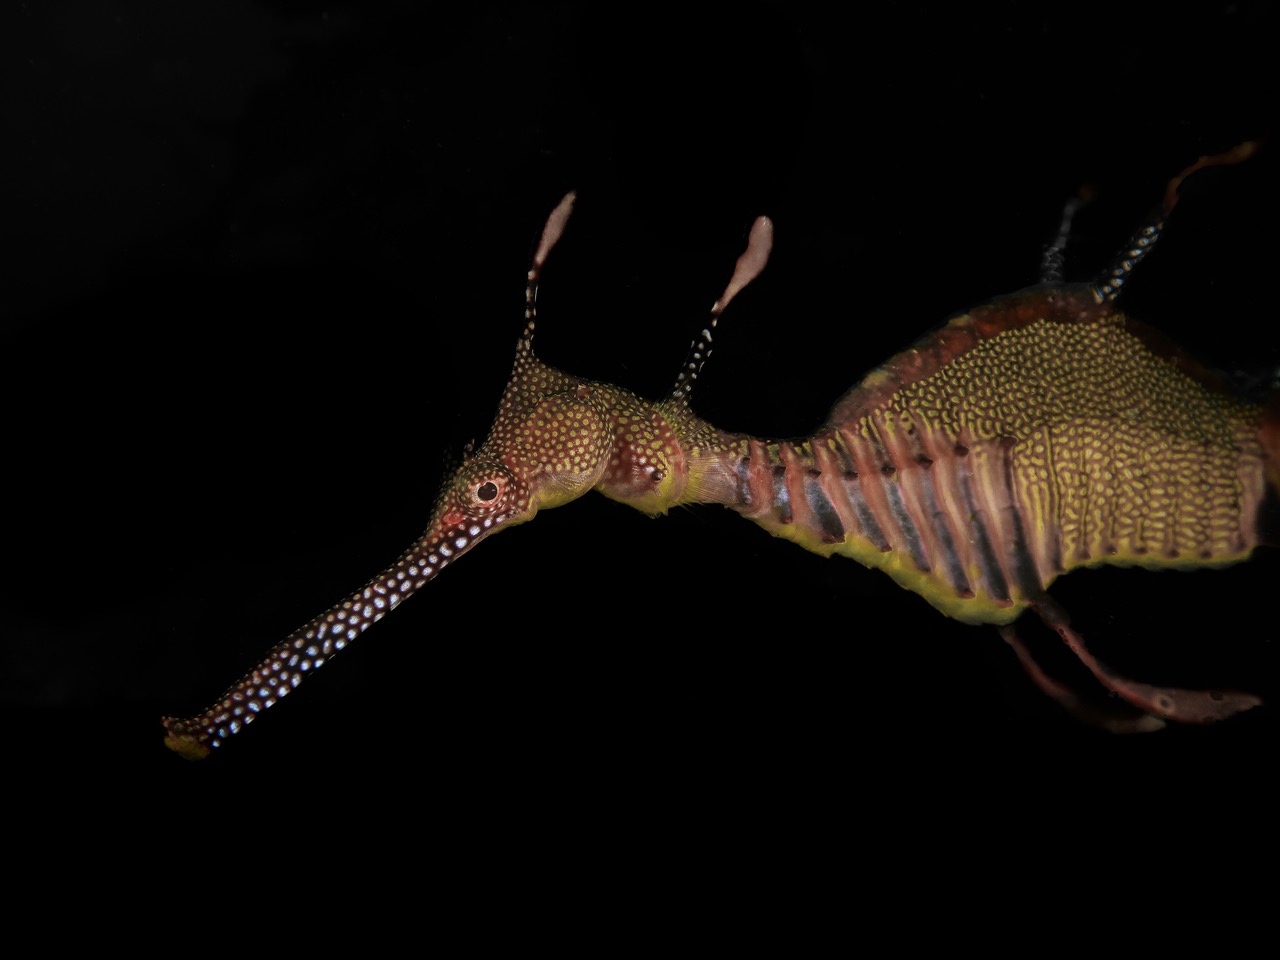 The Sea Dragon: What is it?